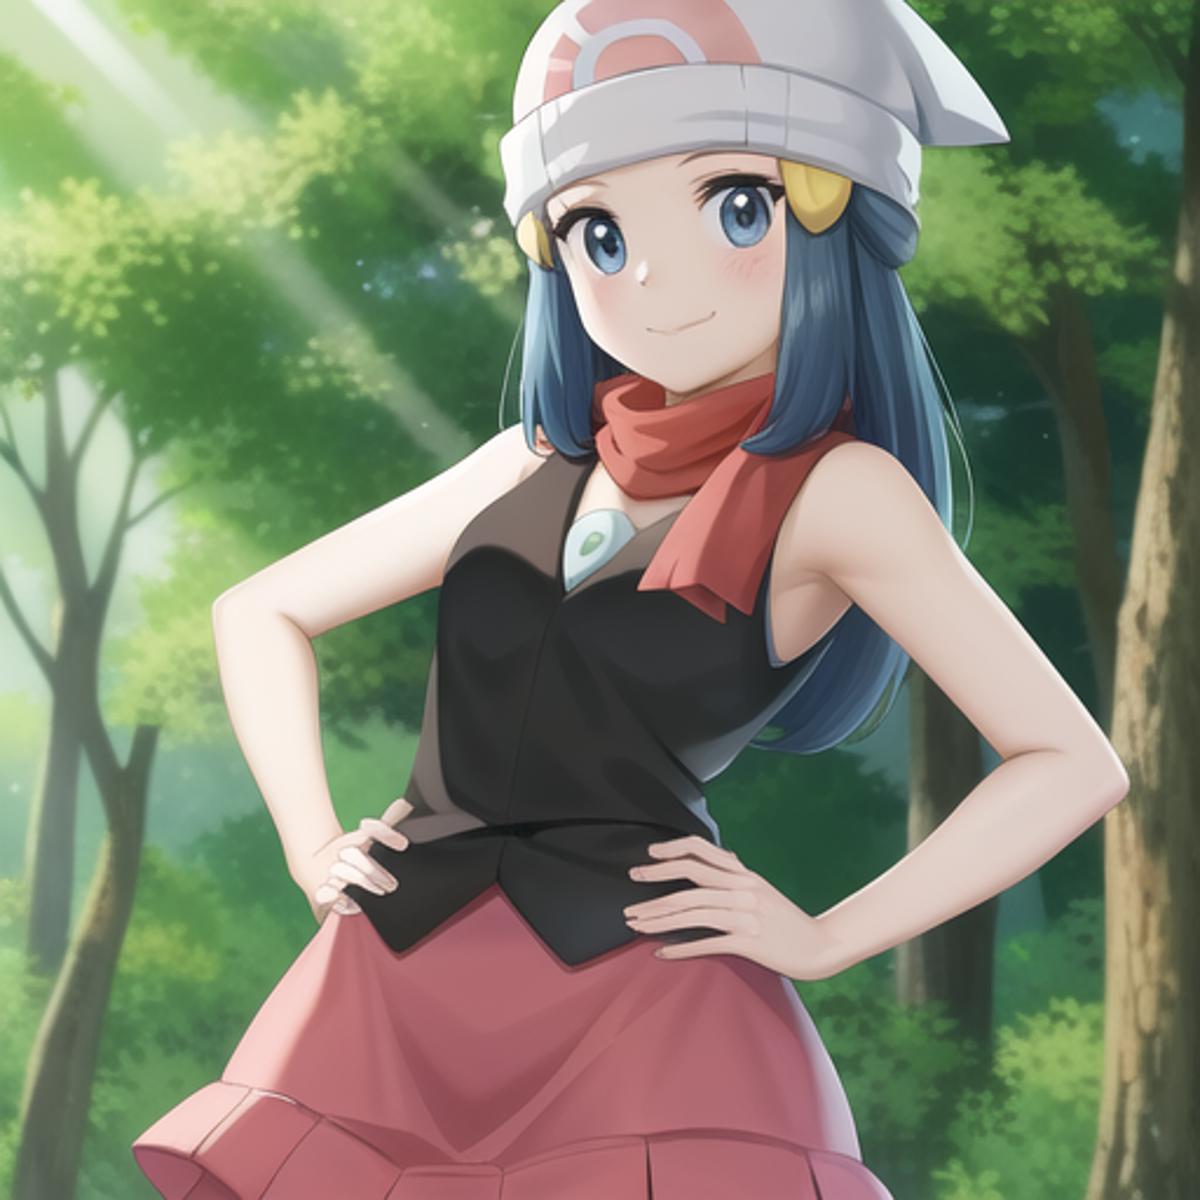 Pokemon - Dawn 6 Outfits - v1.0, Stable Diffusion LoRA